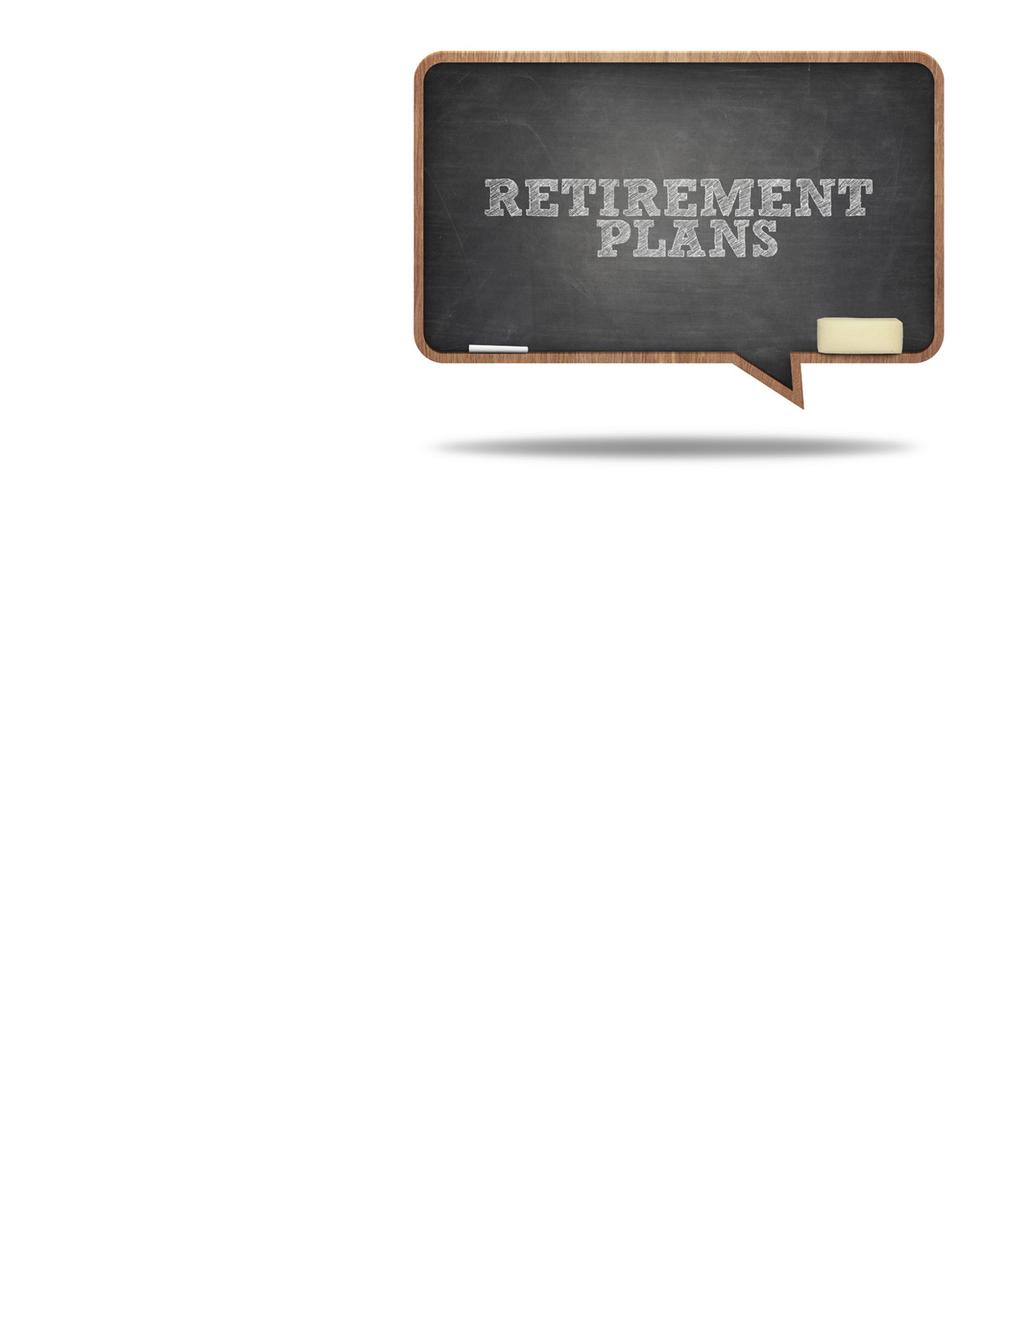 If you are forced to take your retirement benefit at the same time as your spousal or divorced spousal benefit, your retirement benefit will generally wipe out your spousal or divorced spousal